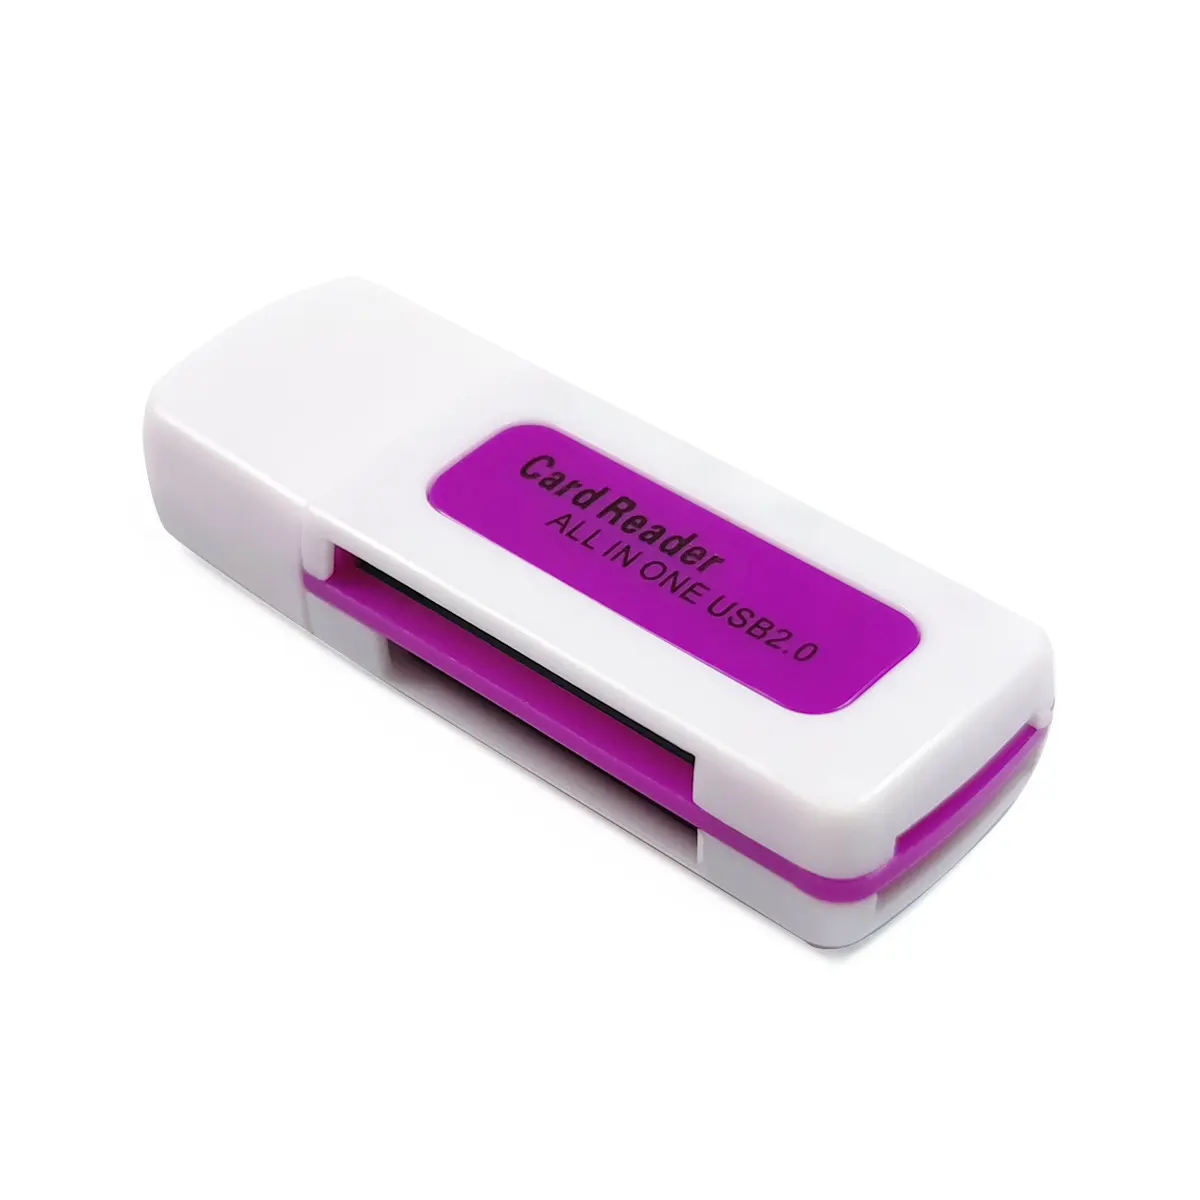 Factory price Hot selling 4 in 1 Multi Function USB 2.0 Memory Card Reader Shape Card Reader Adapter for M2 SD DV TF Card